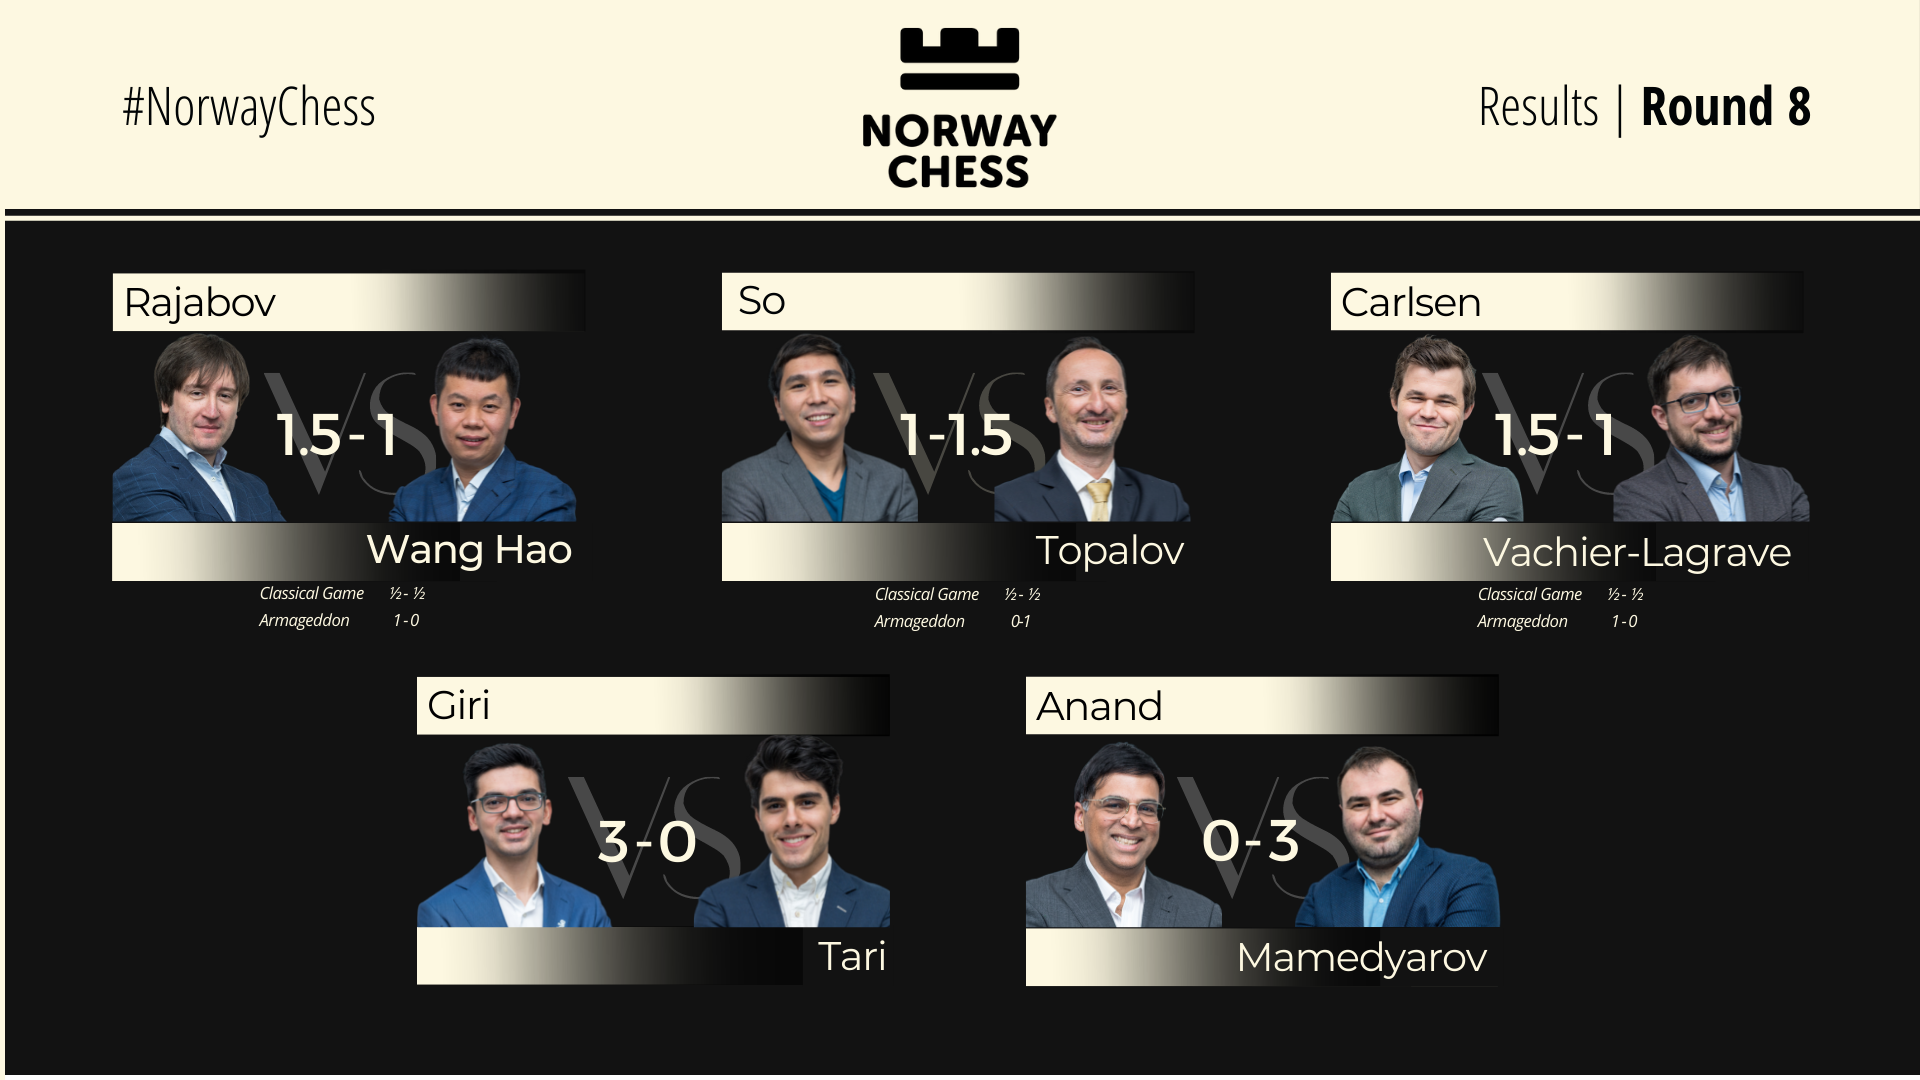 Norway Chess Results Round 8